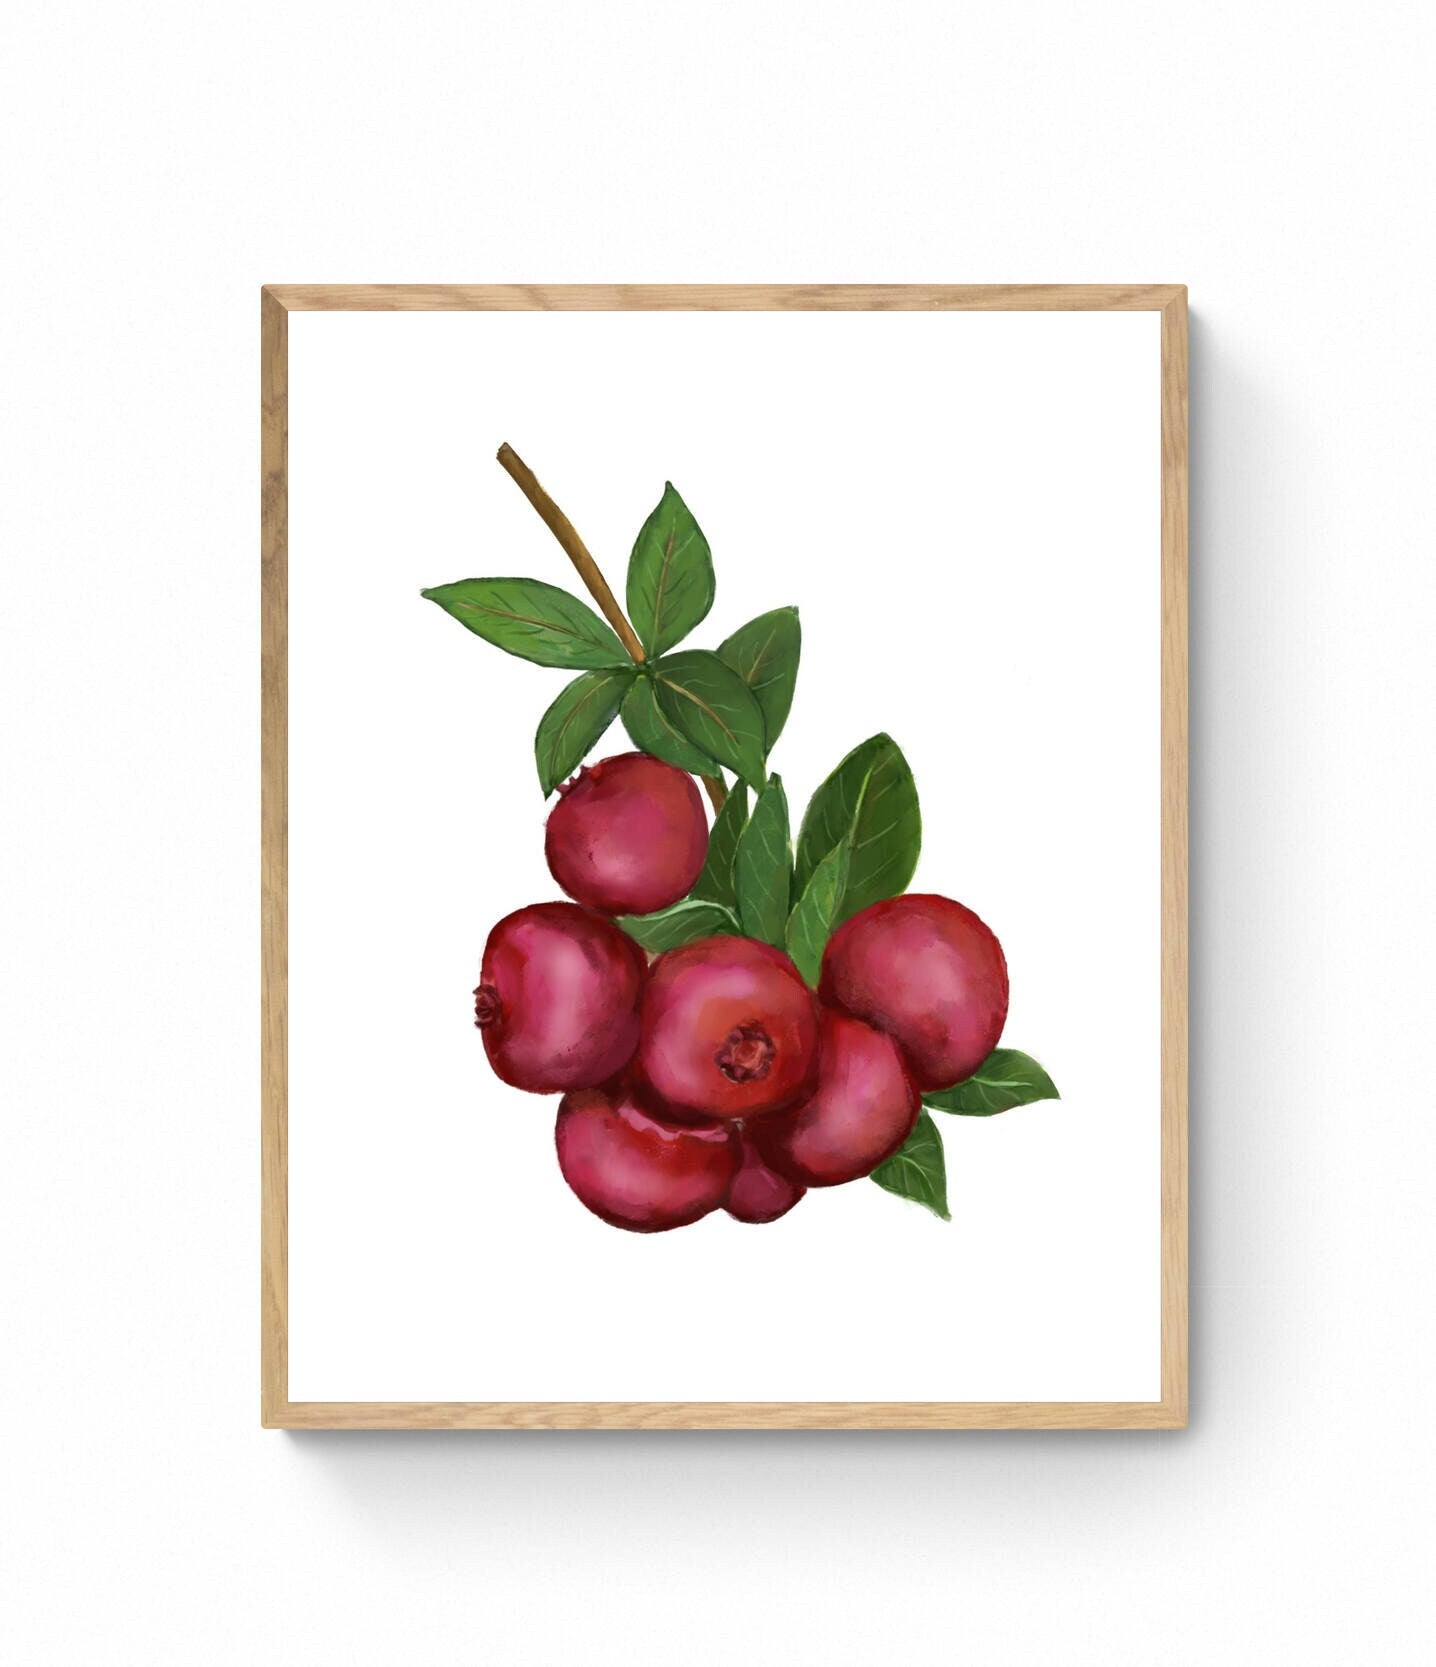 Cranberry Art Print, Cranberry Wall Art, Kitchen Wall Hanging, Dining Room Decor, Berry Painting, Fruit Illustration, Farmhouse Wall Decor